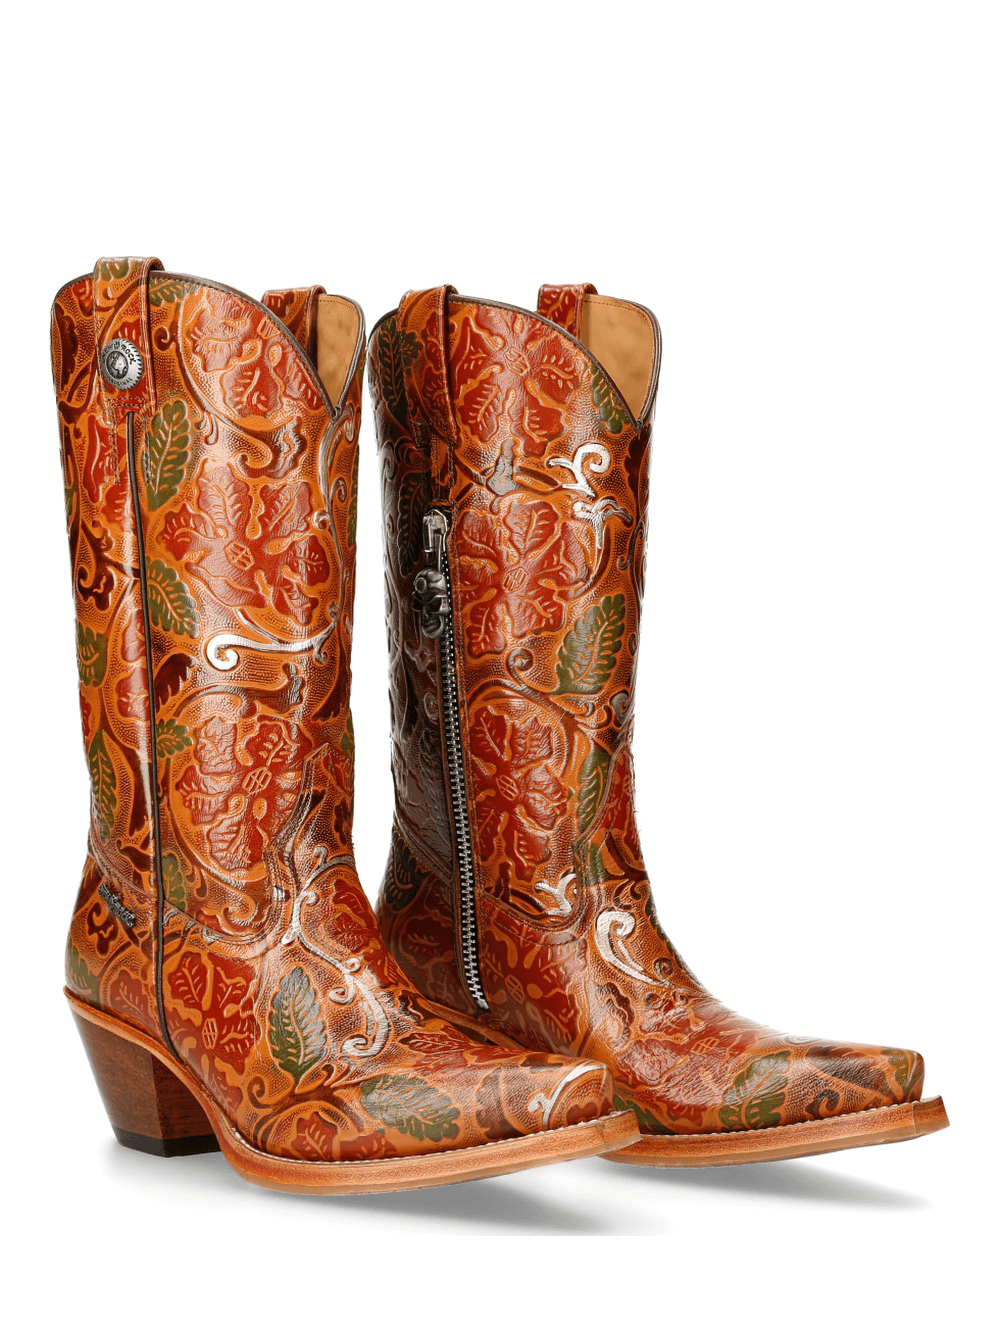 NEW ROCK Exquisite Western-Inspired Tall Leather Boots